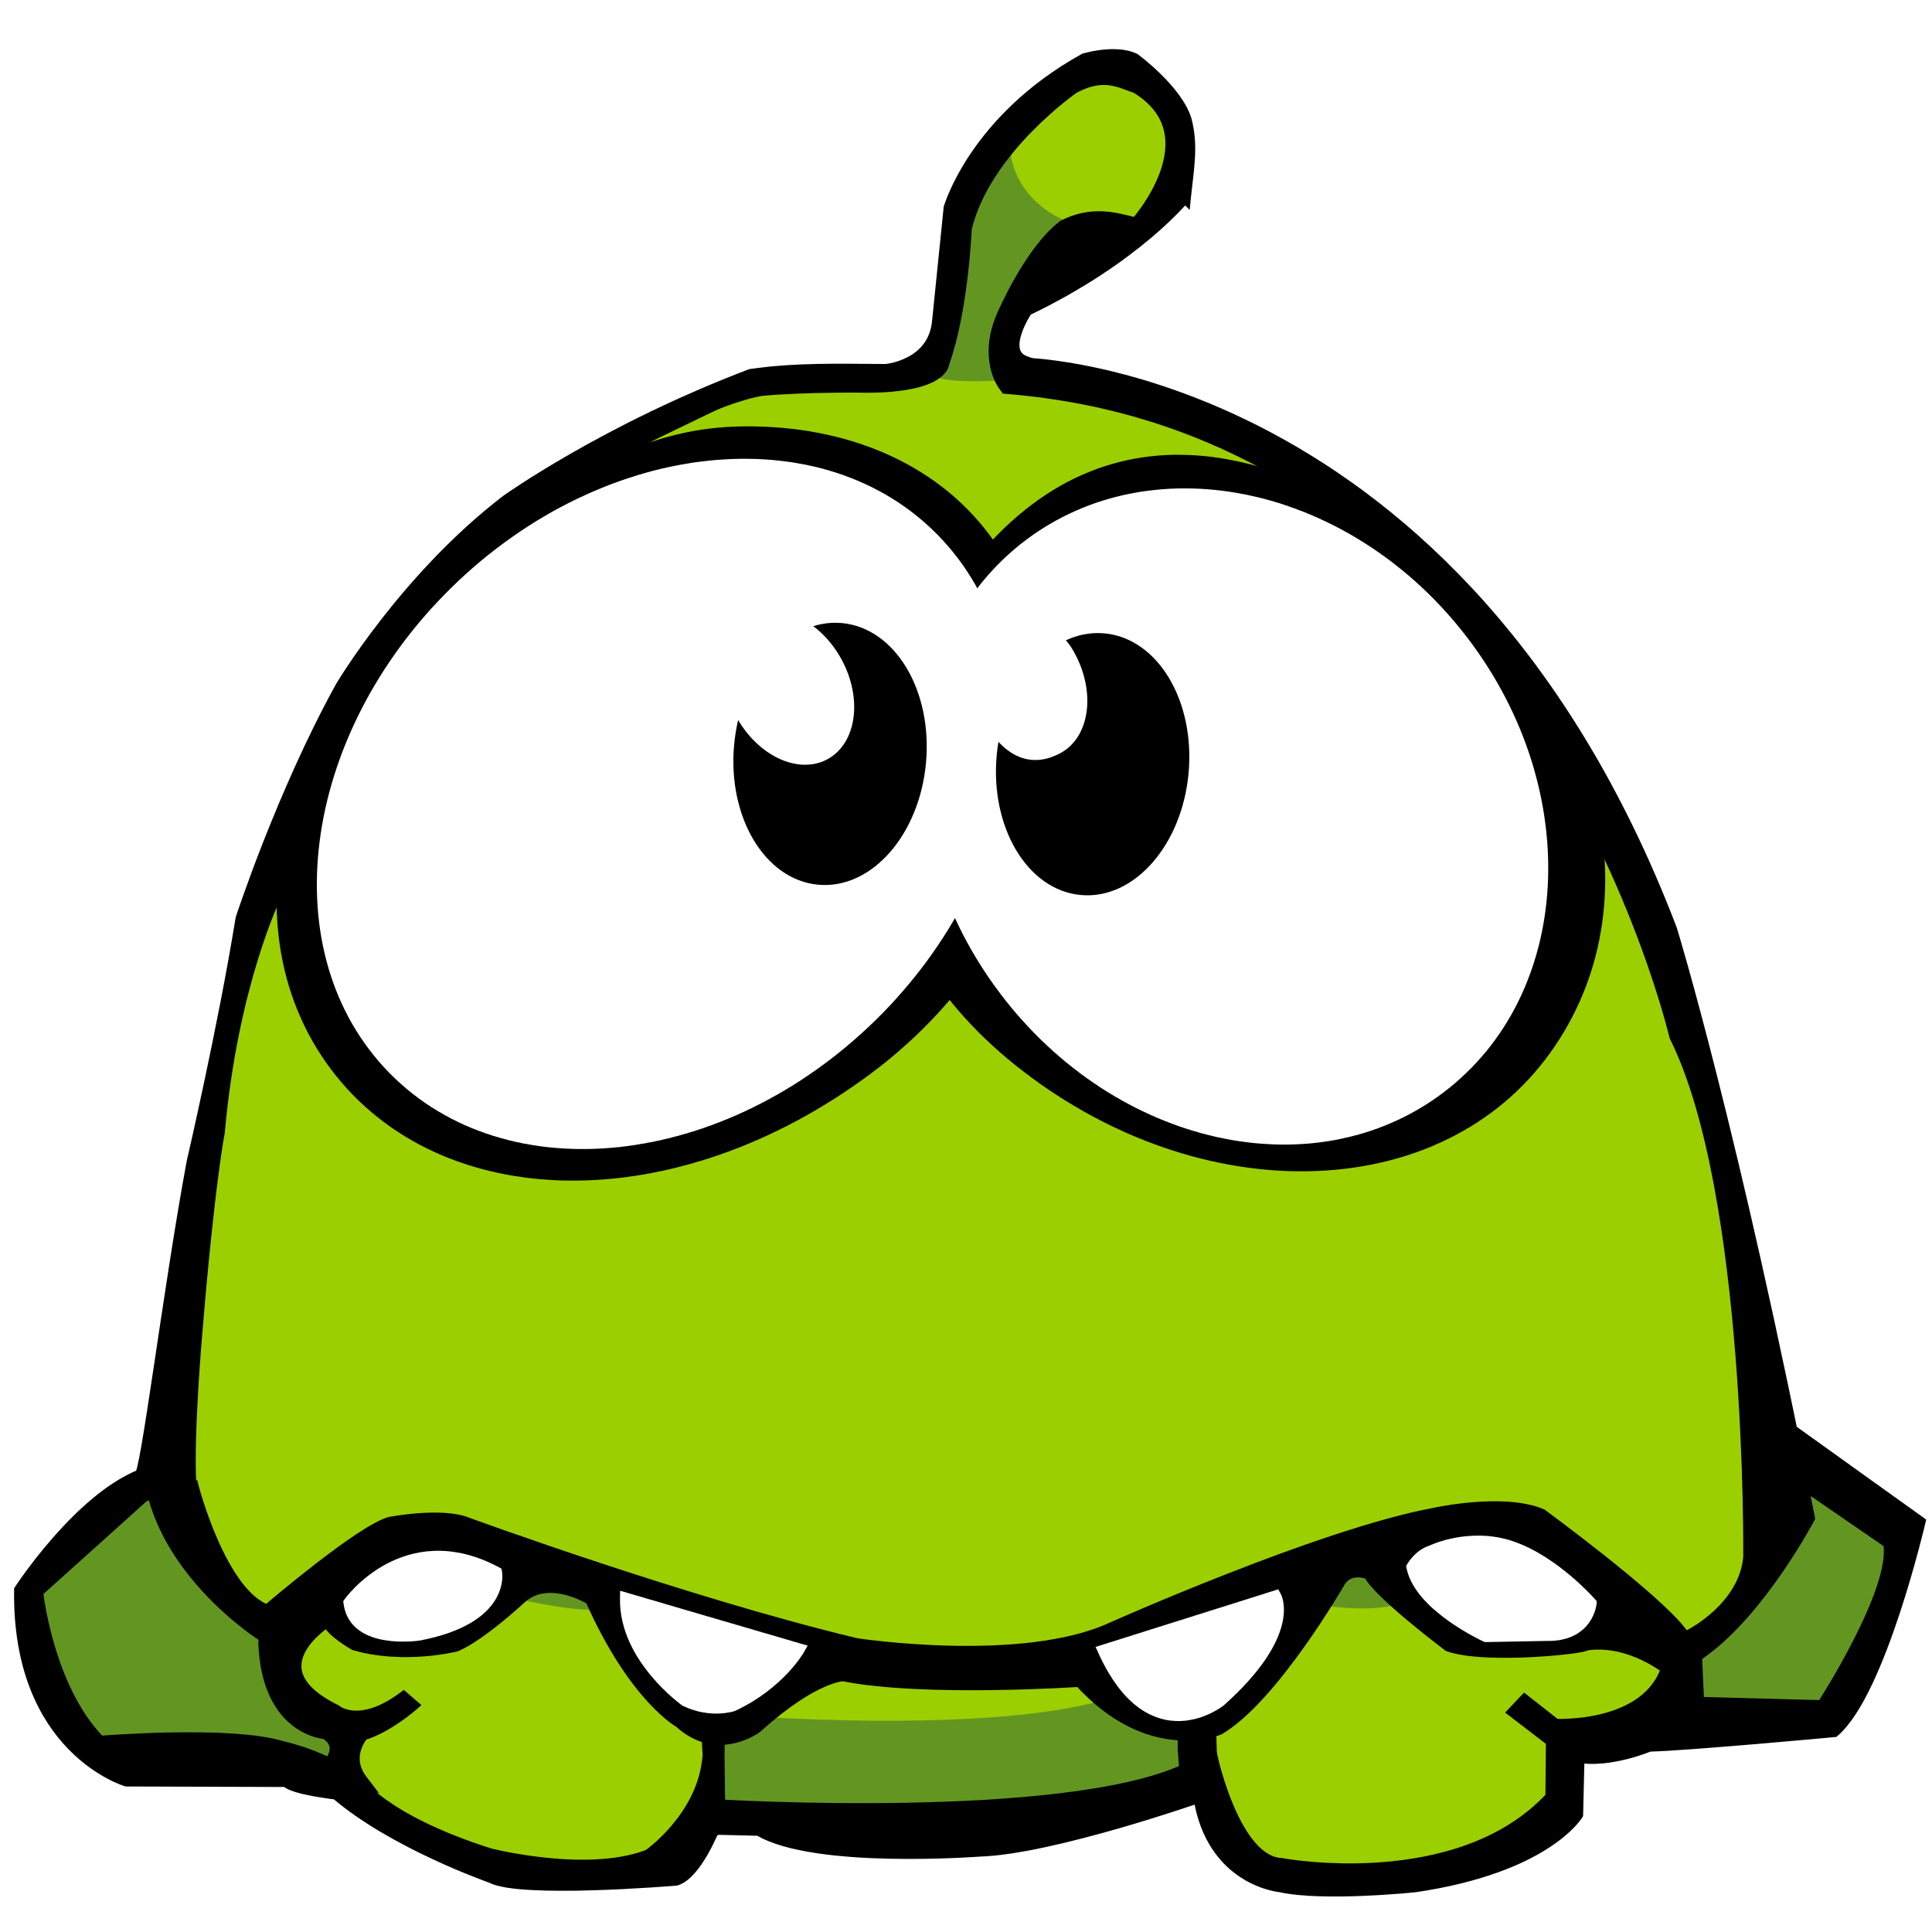 https://anysigns.ca/wp-content/uploads/Om-Nom-Looking-Sad-Cut-the-Rope-vinyl-sticker.png